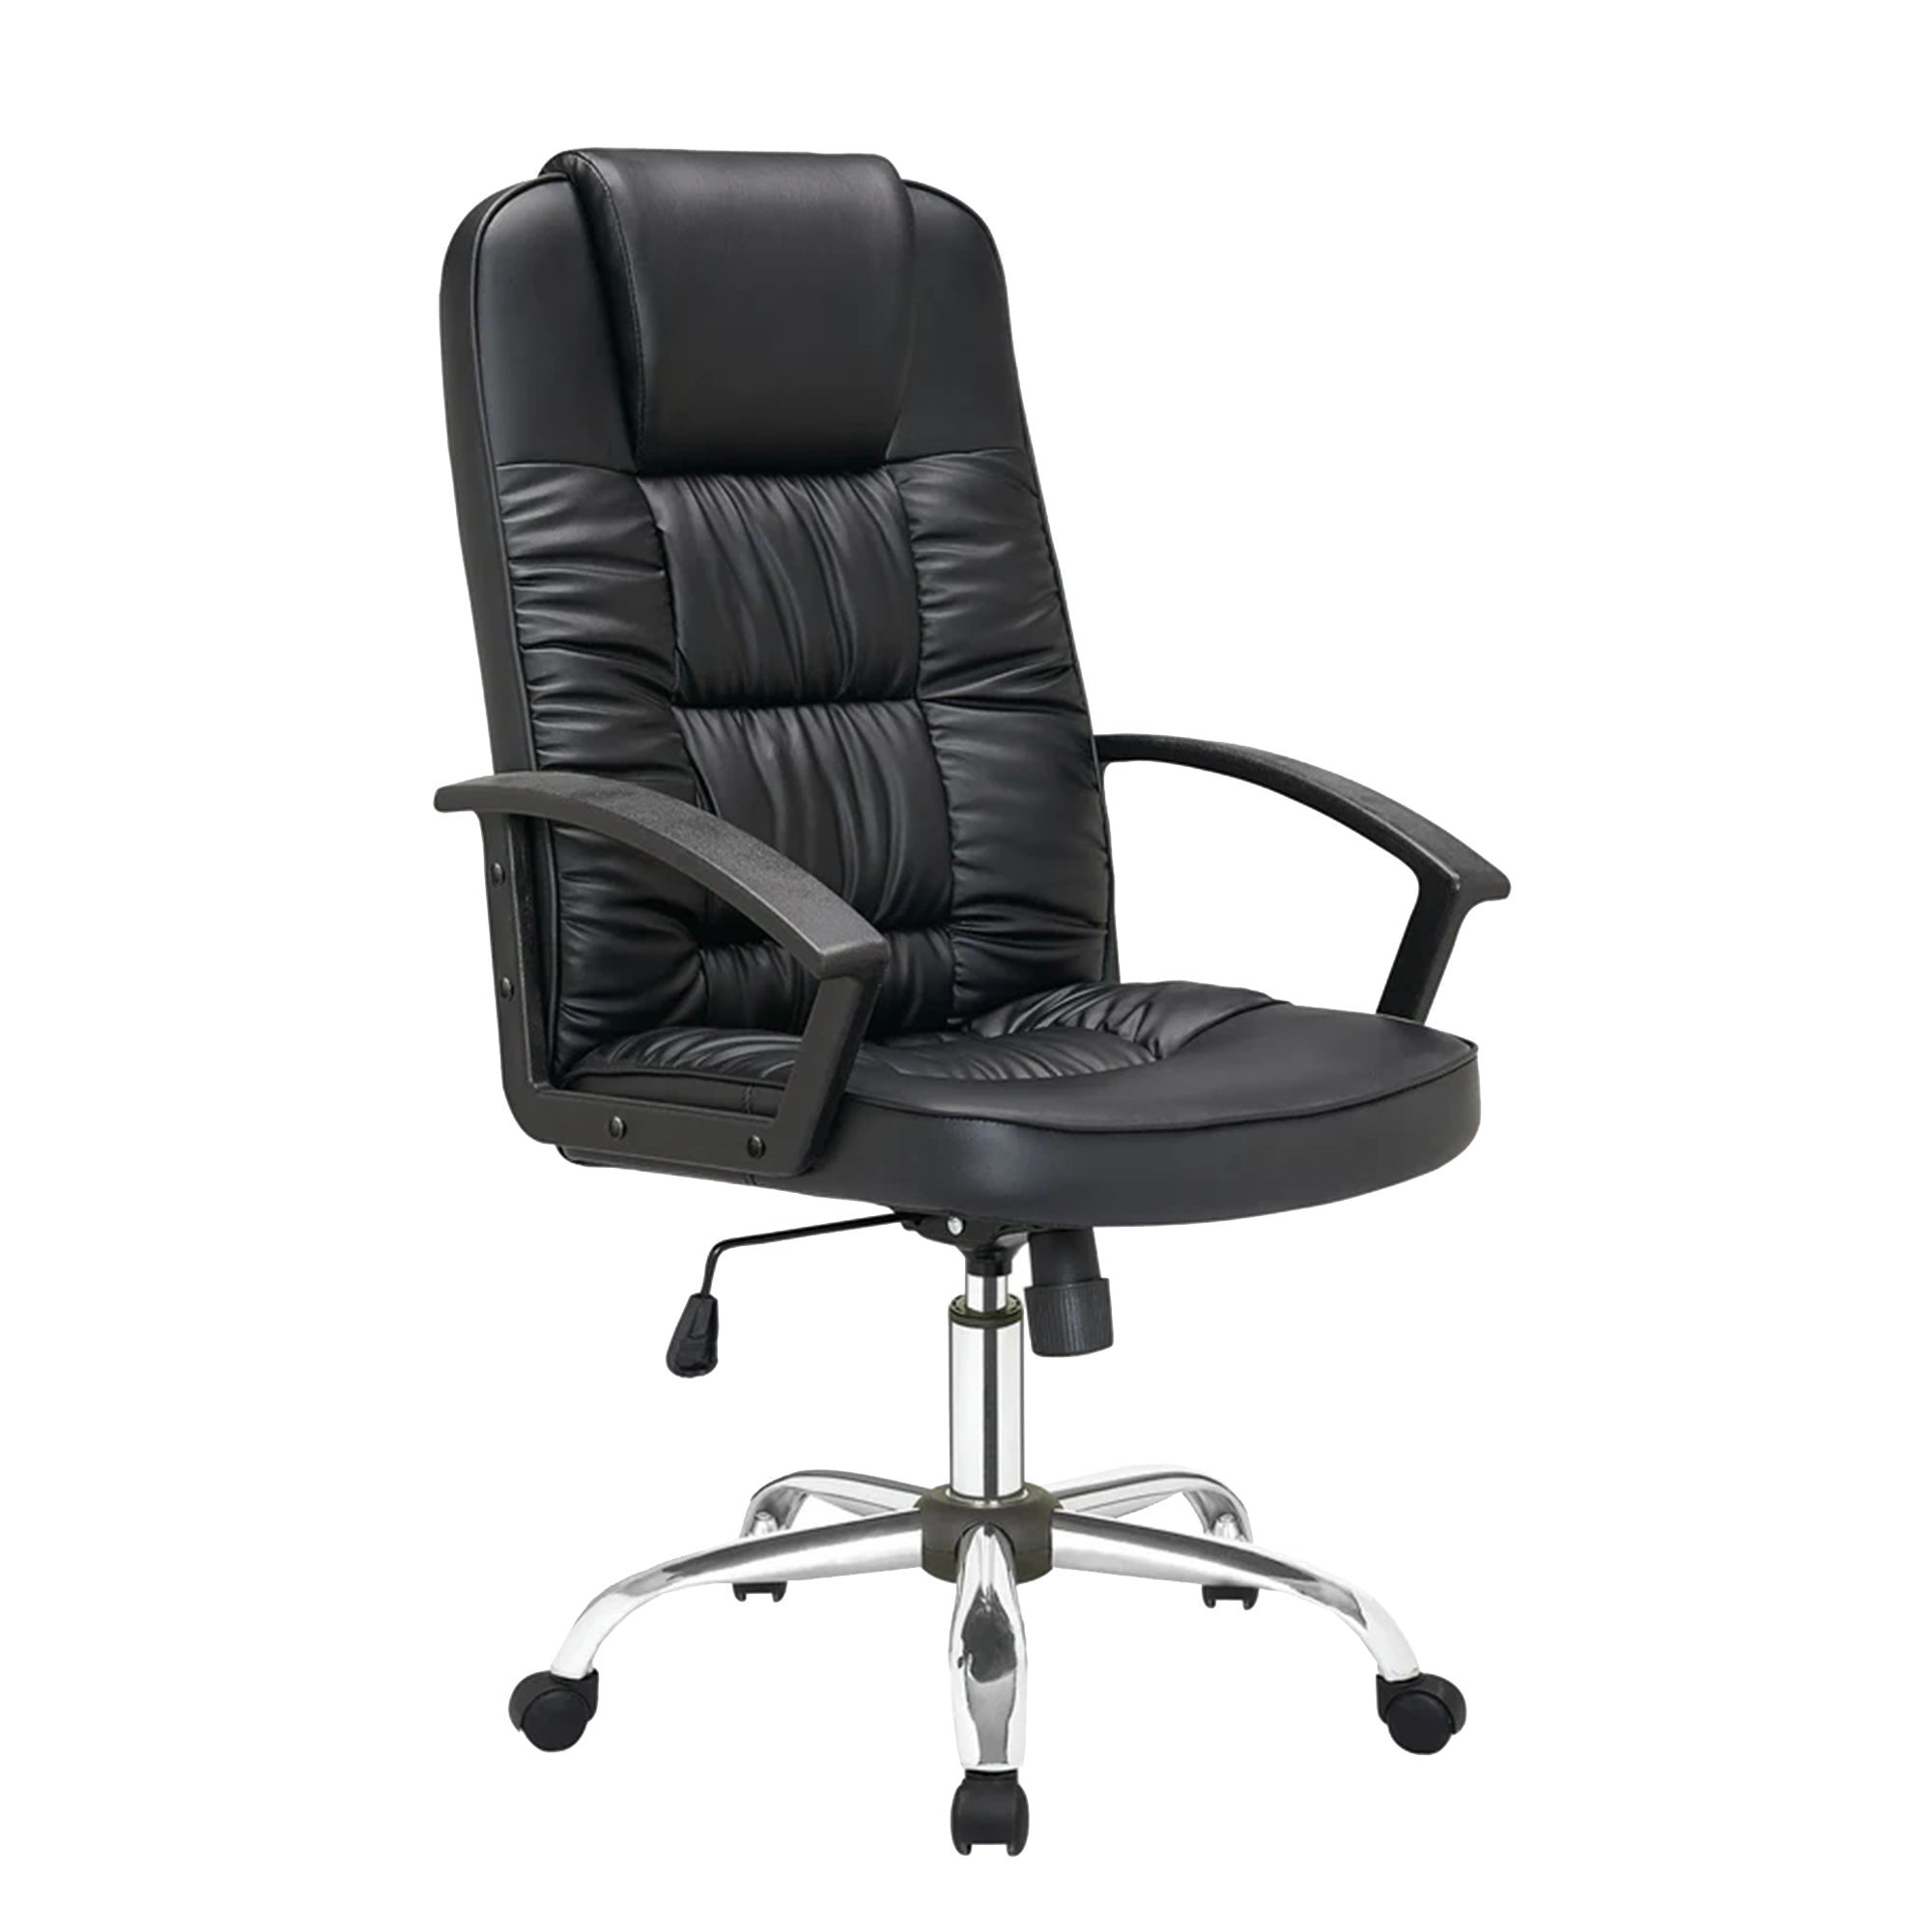 Office Chair PU Leather Computer Gaming Executive Racer Chairs Gas Lift Seat